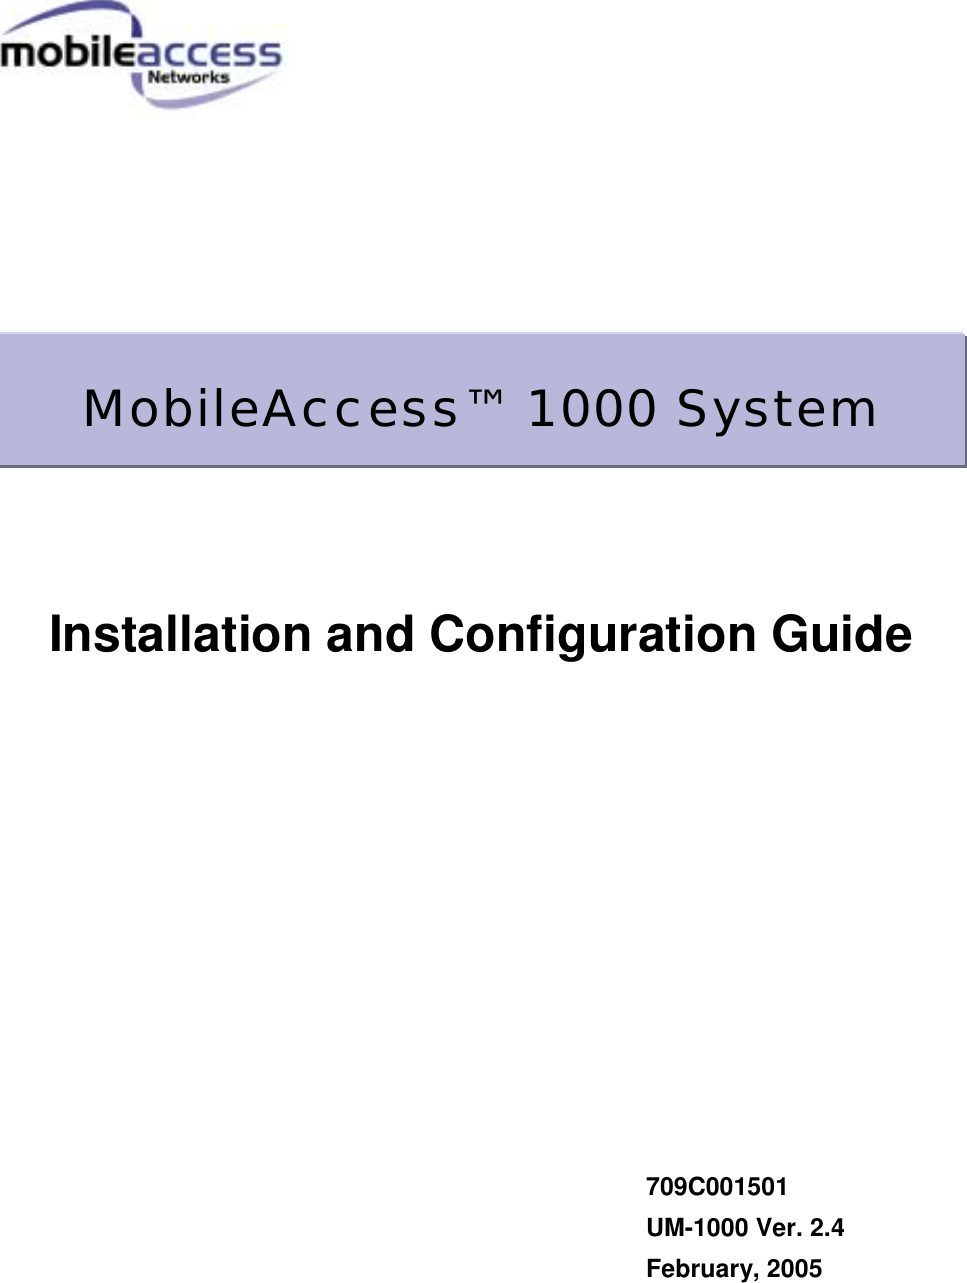                      Installation and Configuration Guide                        709C001501  UM-1000 Ver. 2.4  February, 2005MobileAccess™ 1000 System 